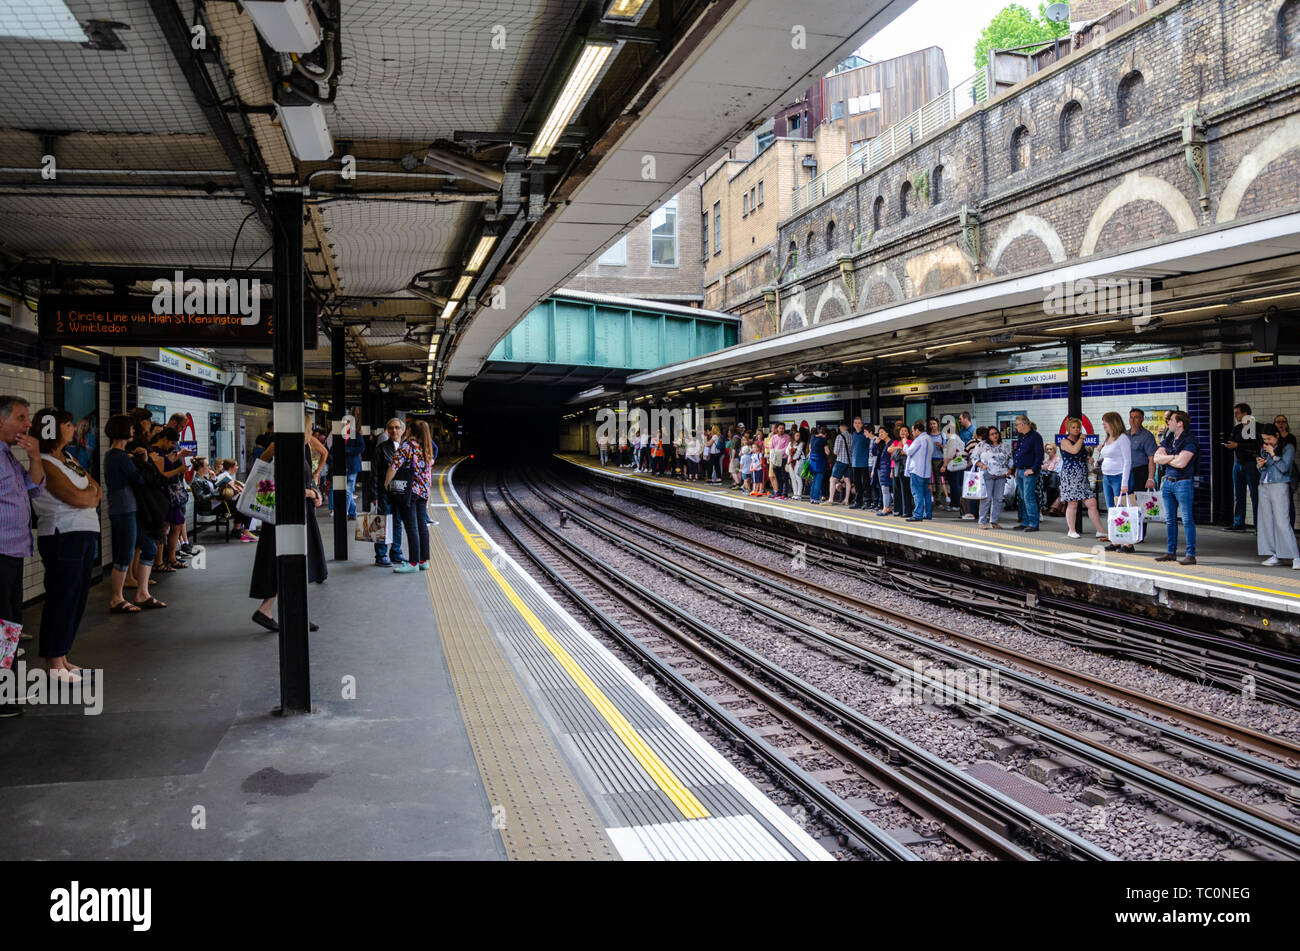 People wait on the platforms at Sloane Square London Underground Station for a train to arrive. Stock Photo